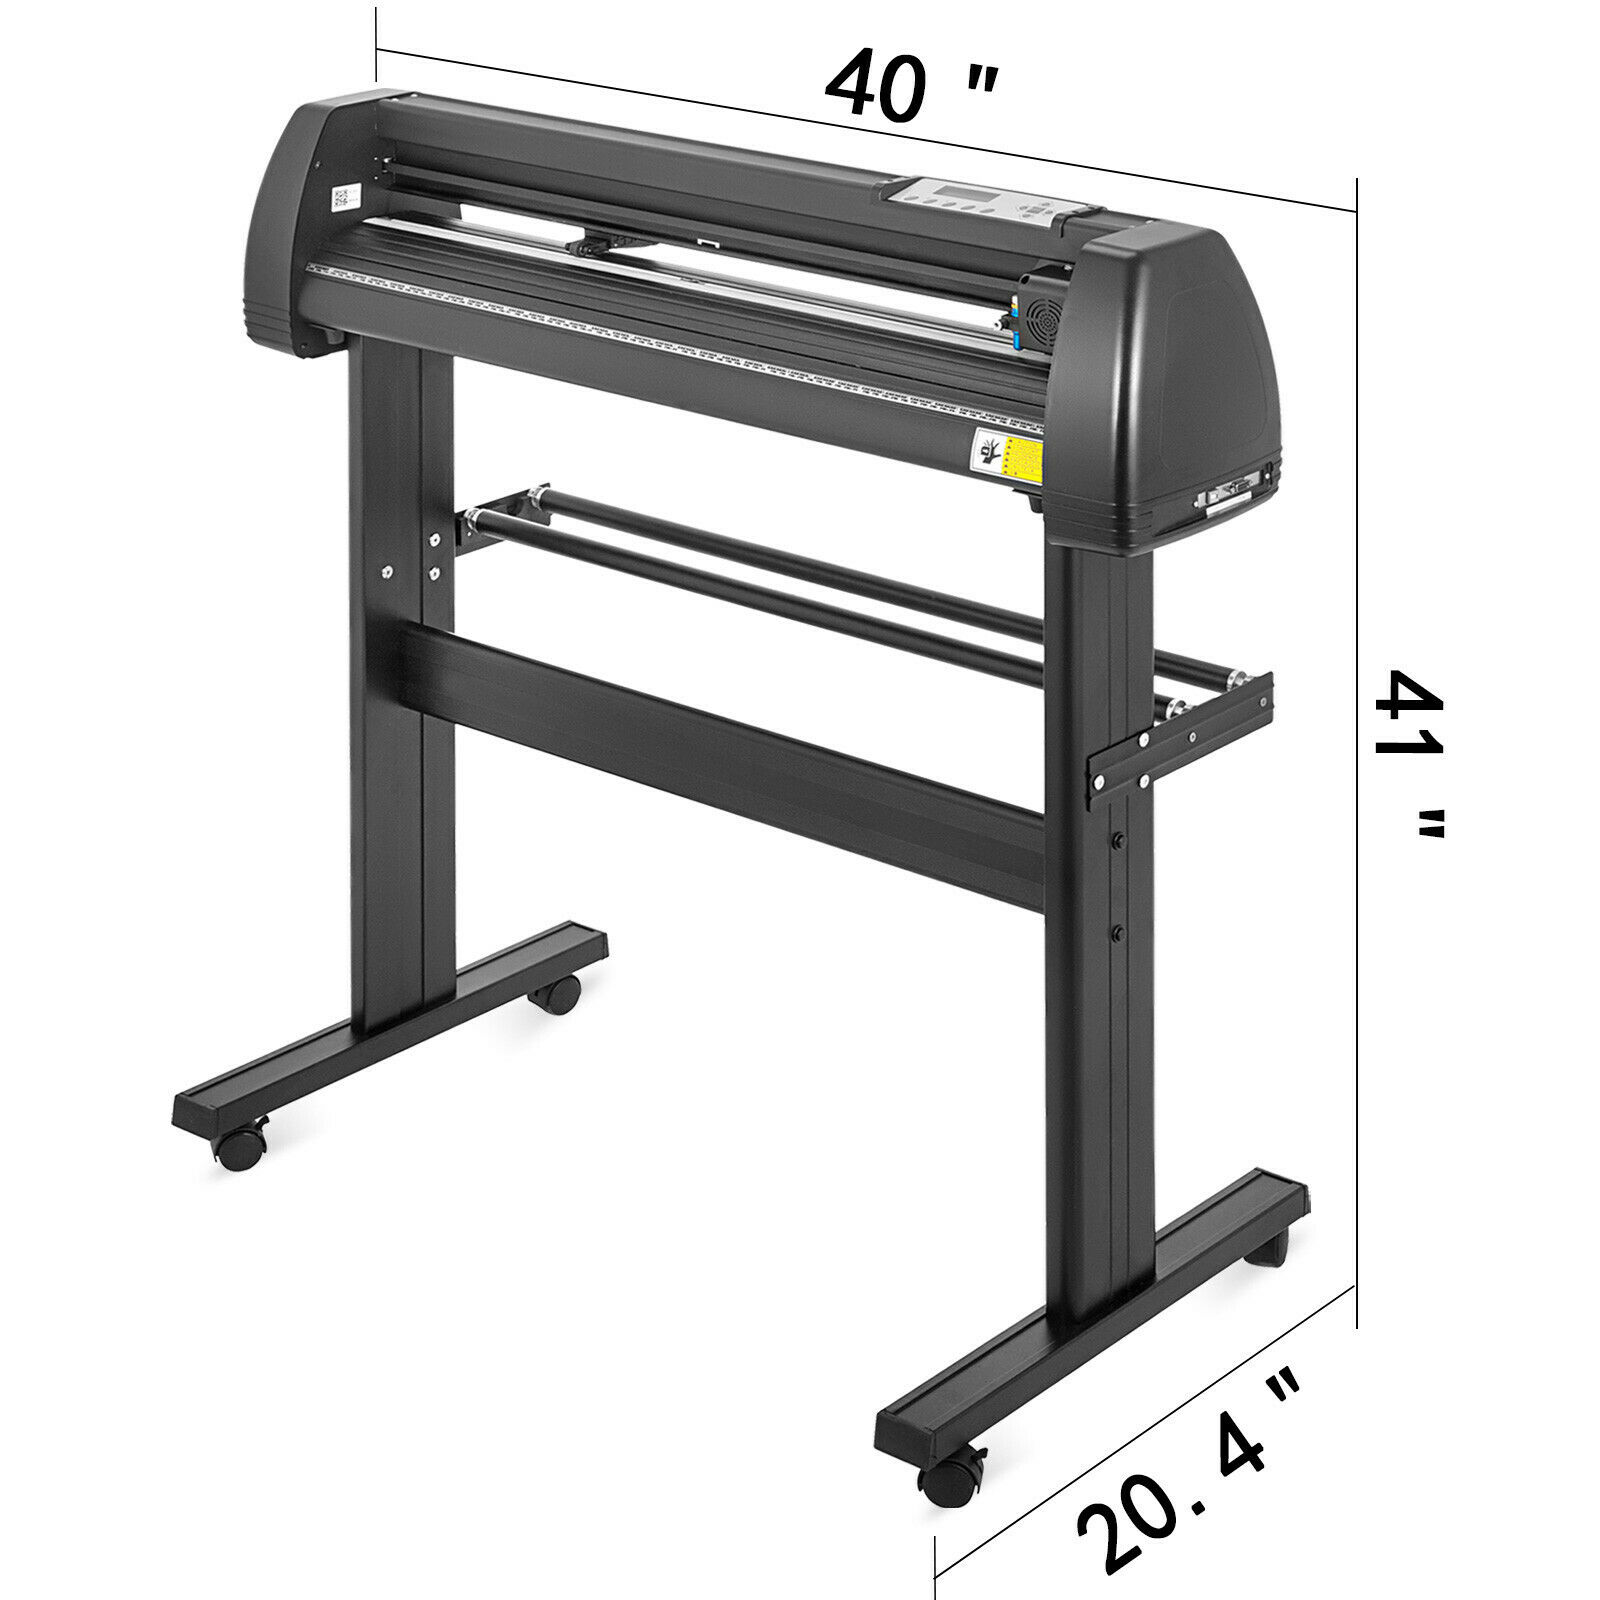 2 FEET VINYL PLOTTER CUTTER WITH STAND with Software